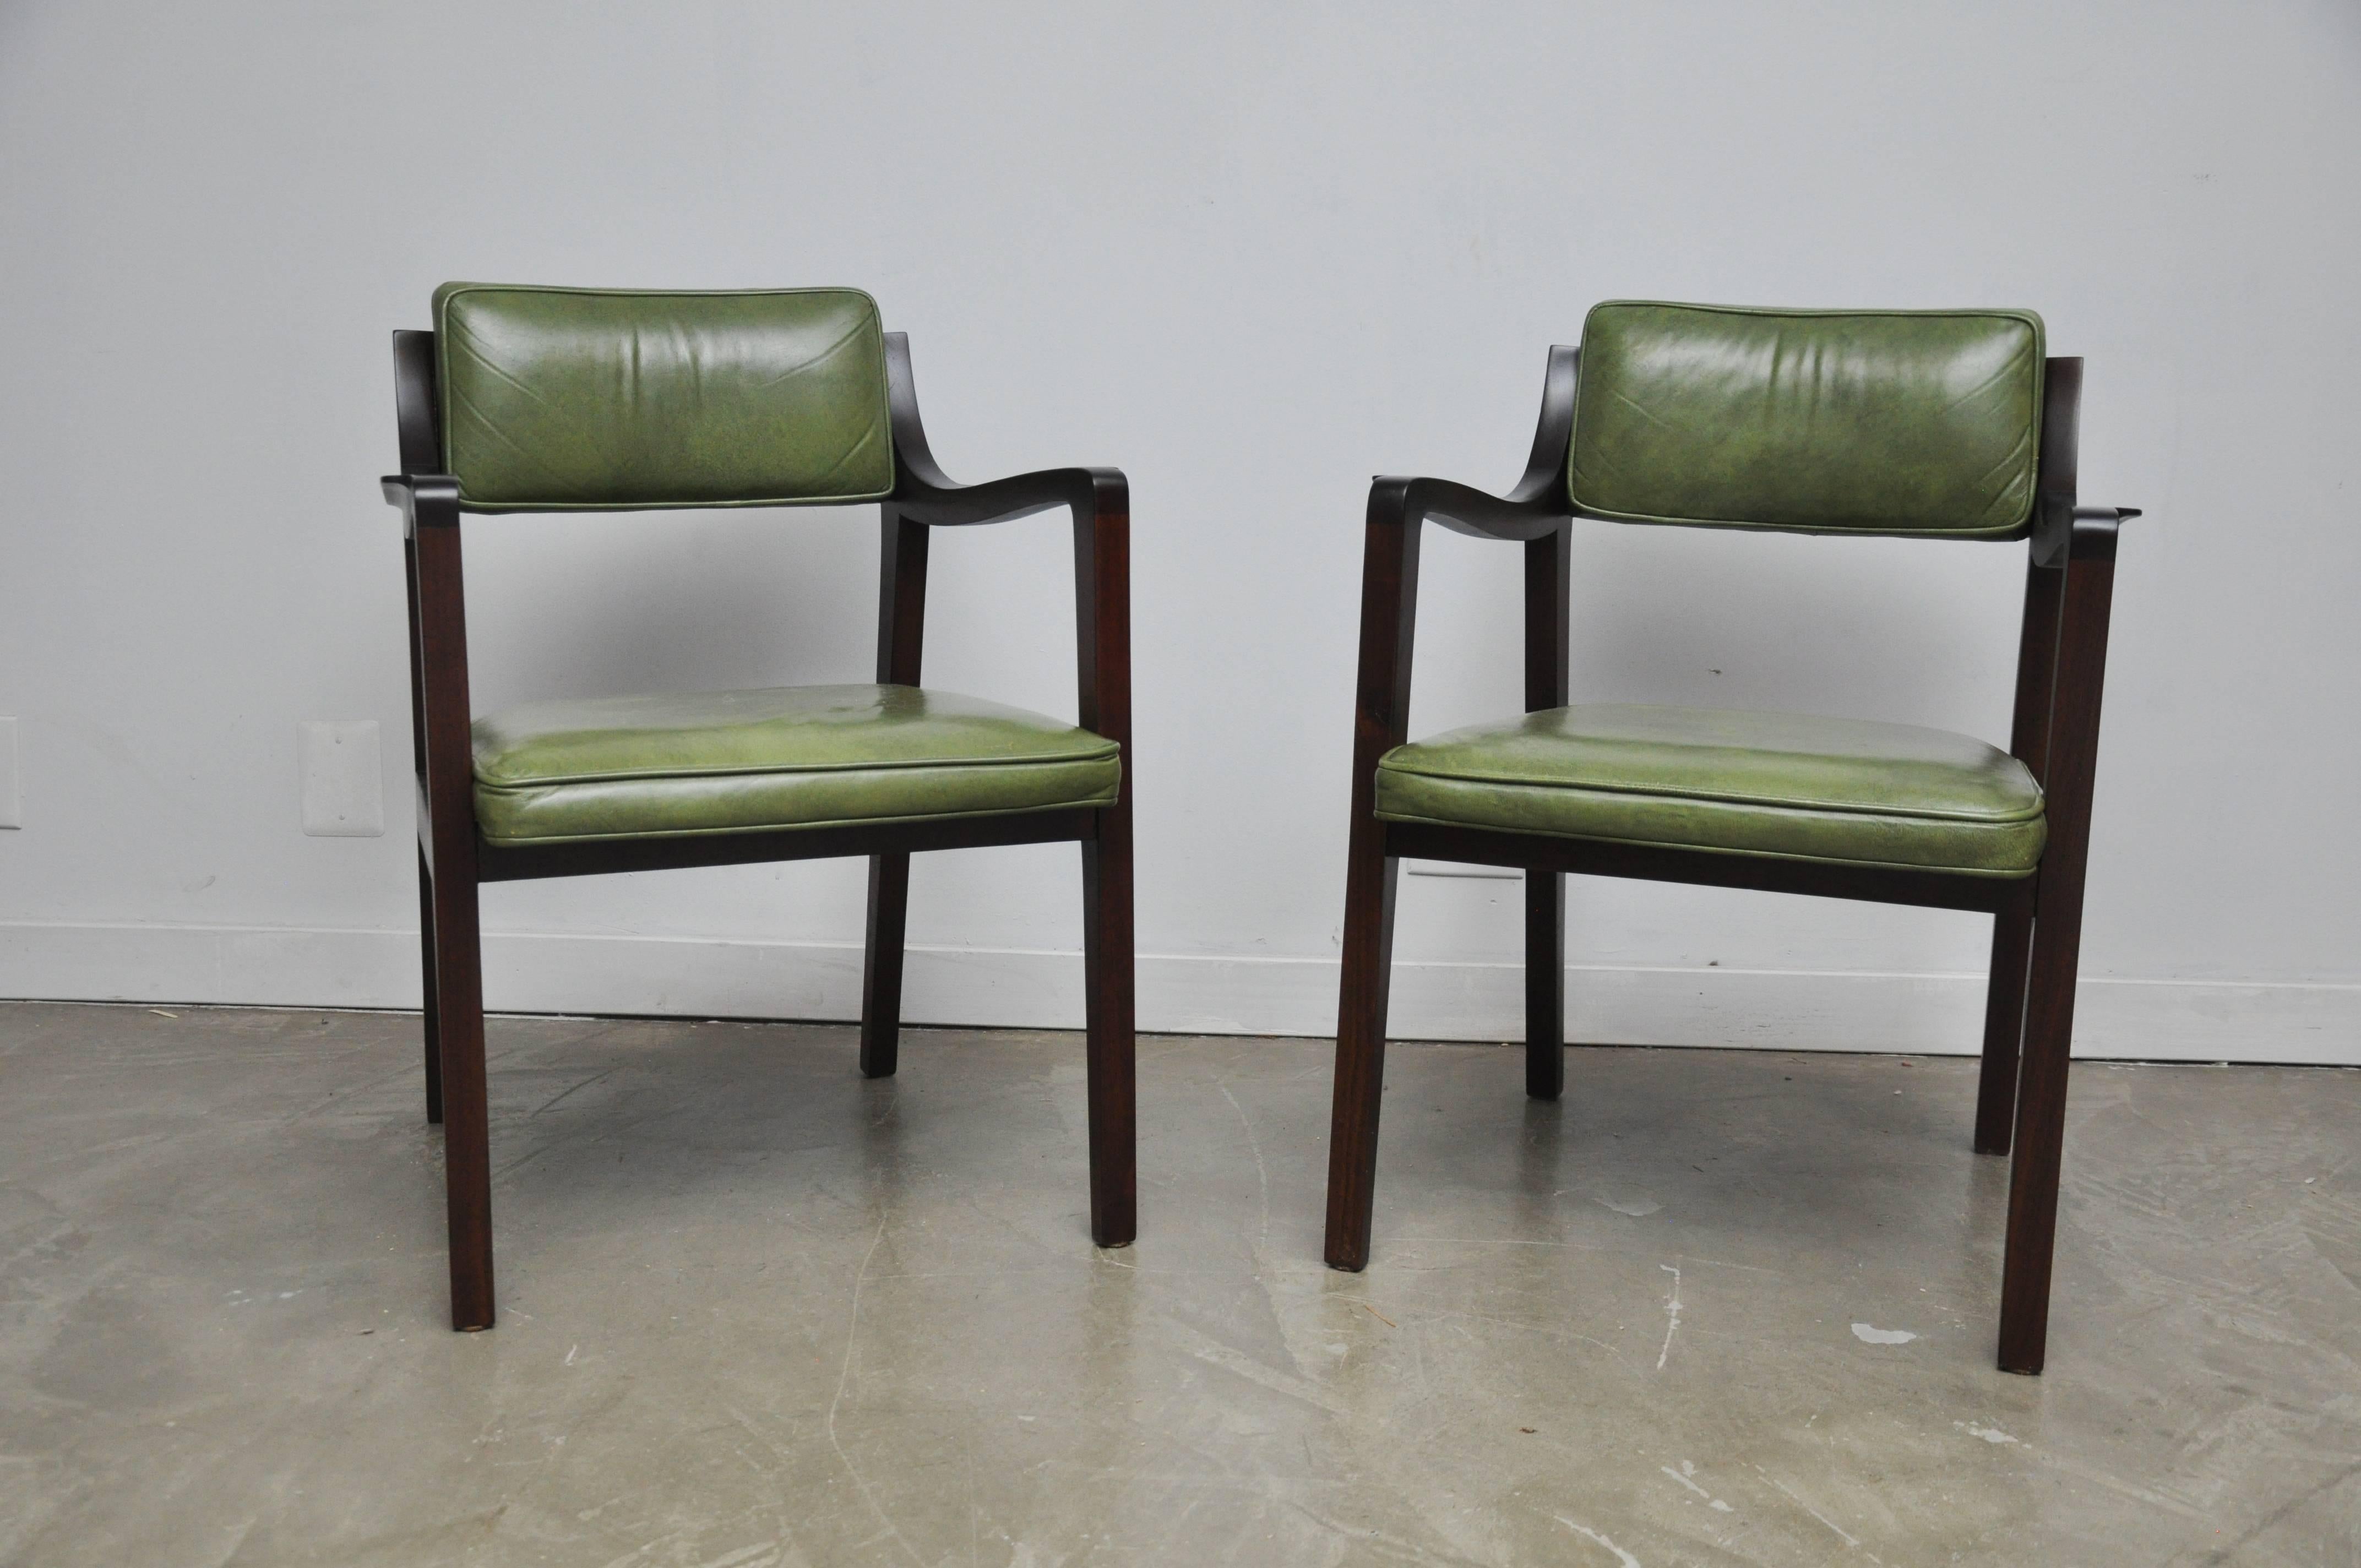 Pair of Riemerschmidt armchairs in original green leather. Frames have been meticulously refinished. Gorgeous leather has been cleaned and conditioned.